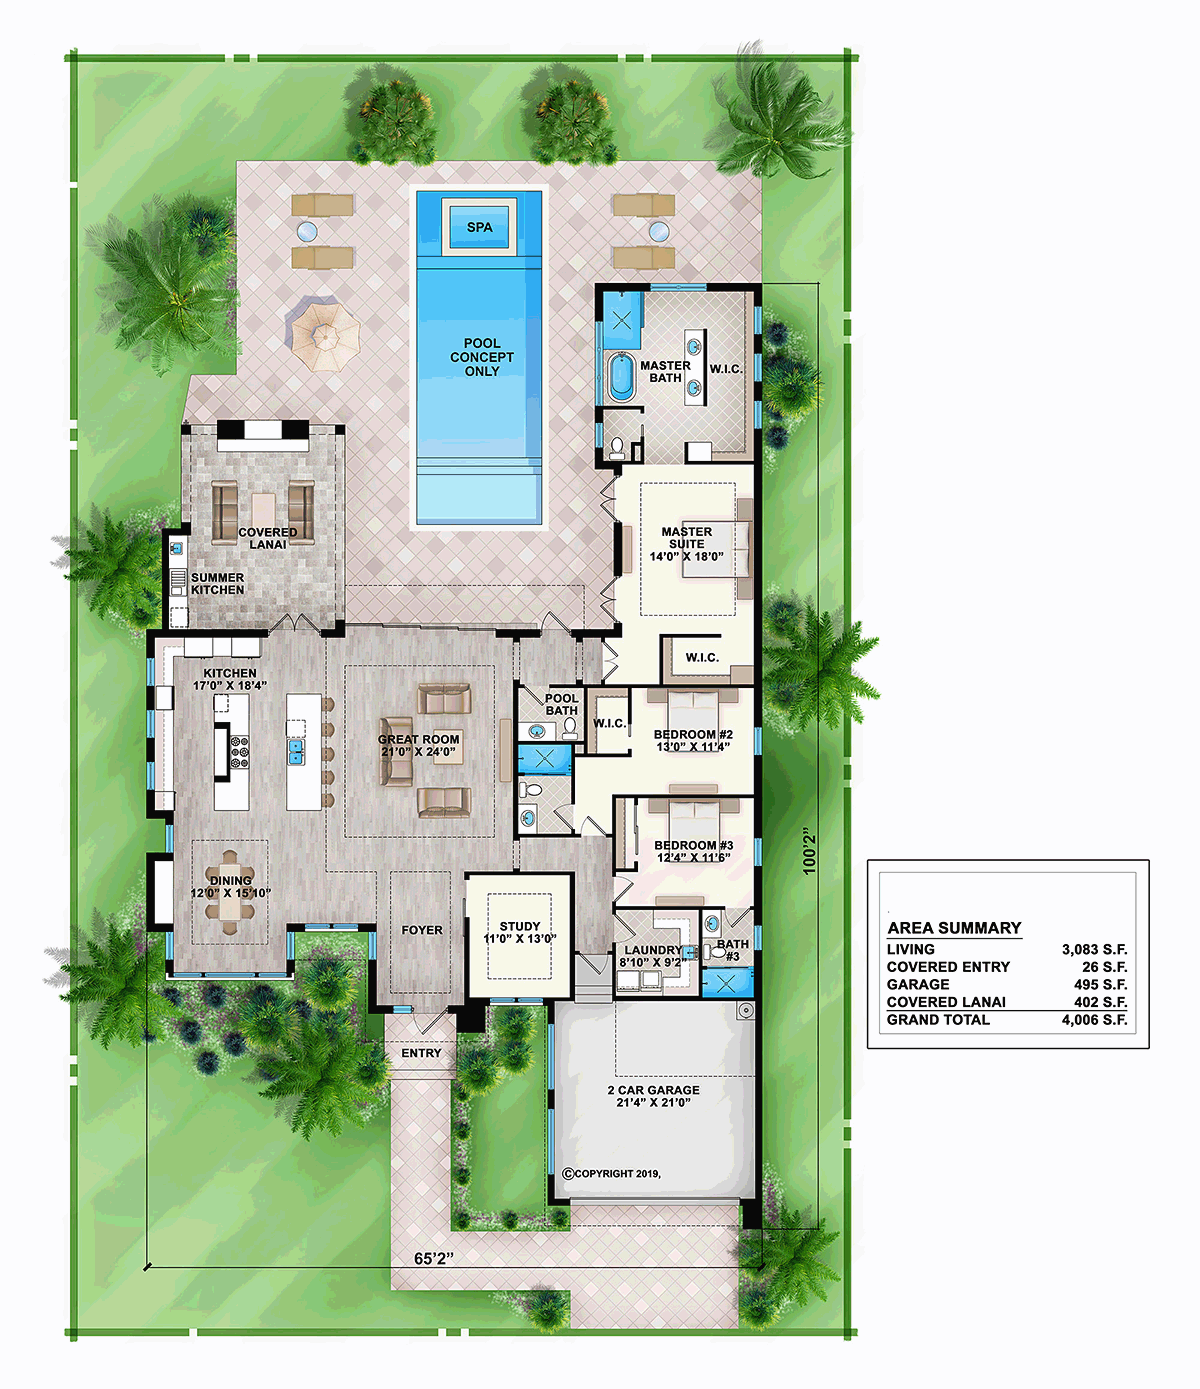 spacious 2 bedrooms Southwestern style patio home architectural blueprints 